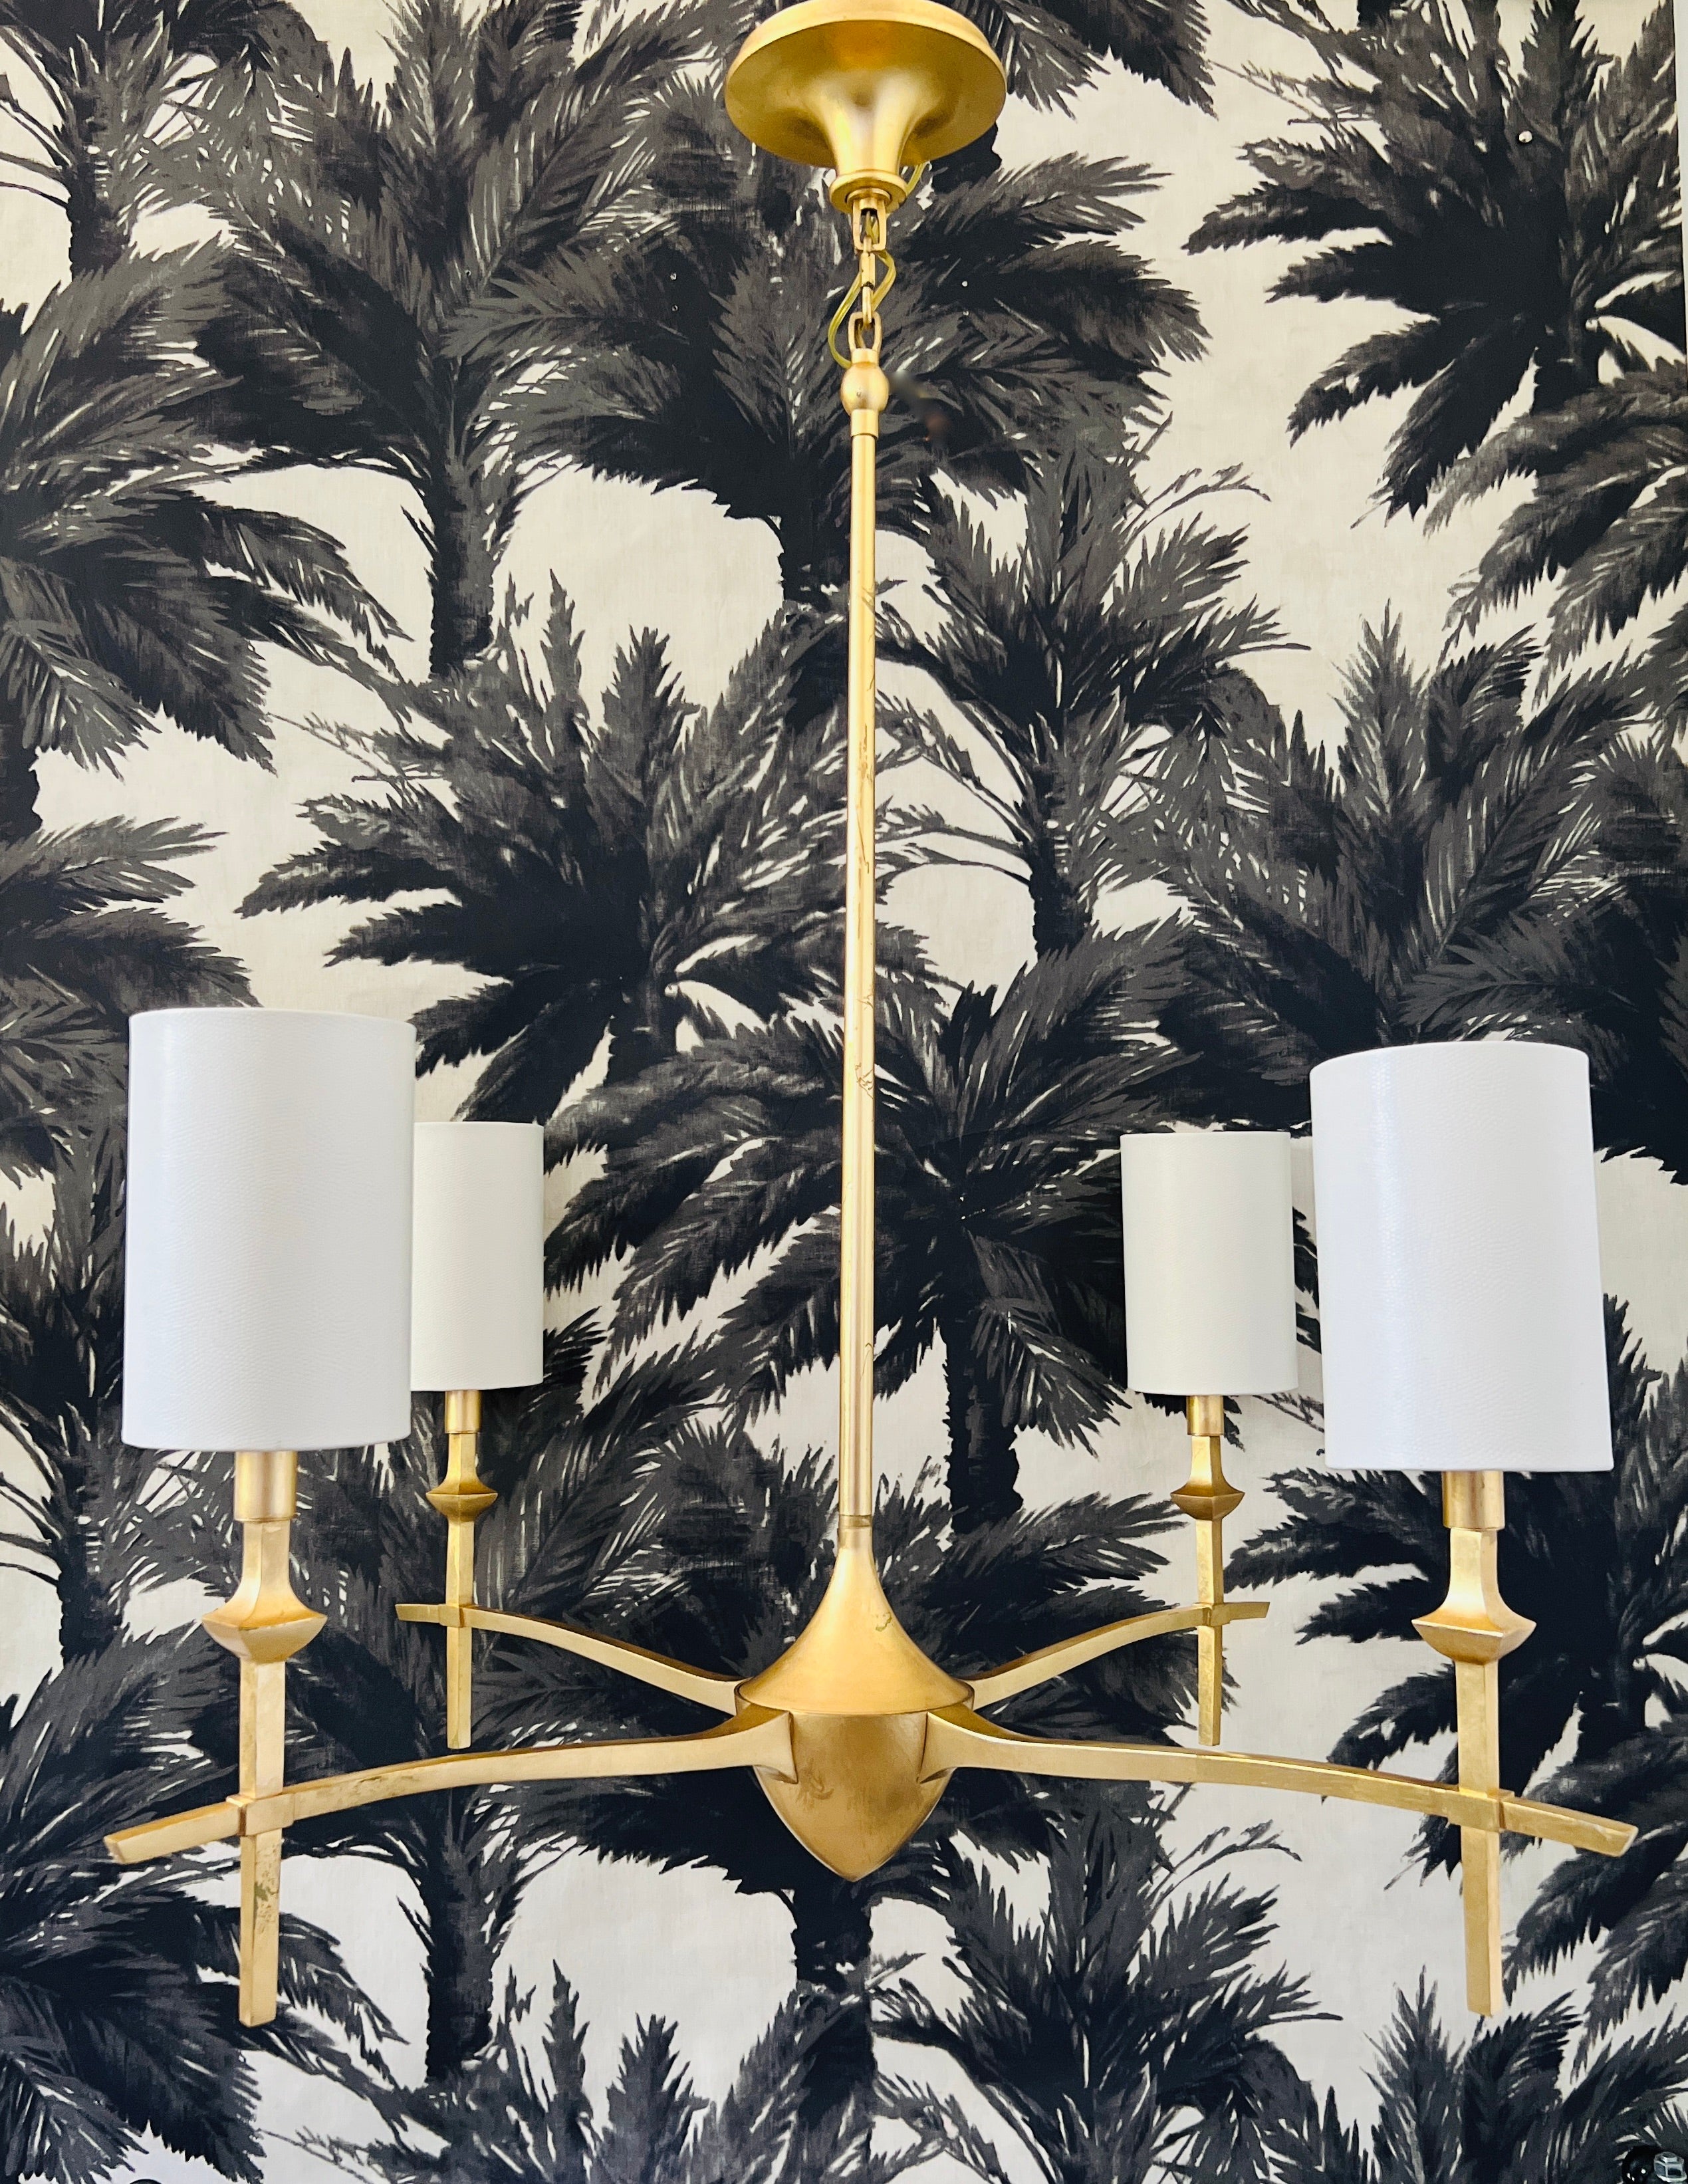 Contemporary gold leaf chandelier with four arm design. The stylized frame has curved arms, candelabra lights, and custom shades in ivory with an embossed snakeskin pattern. Hollywood Regency design with Neoclassical elements. 

36